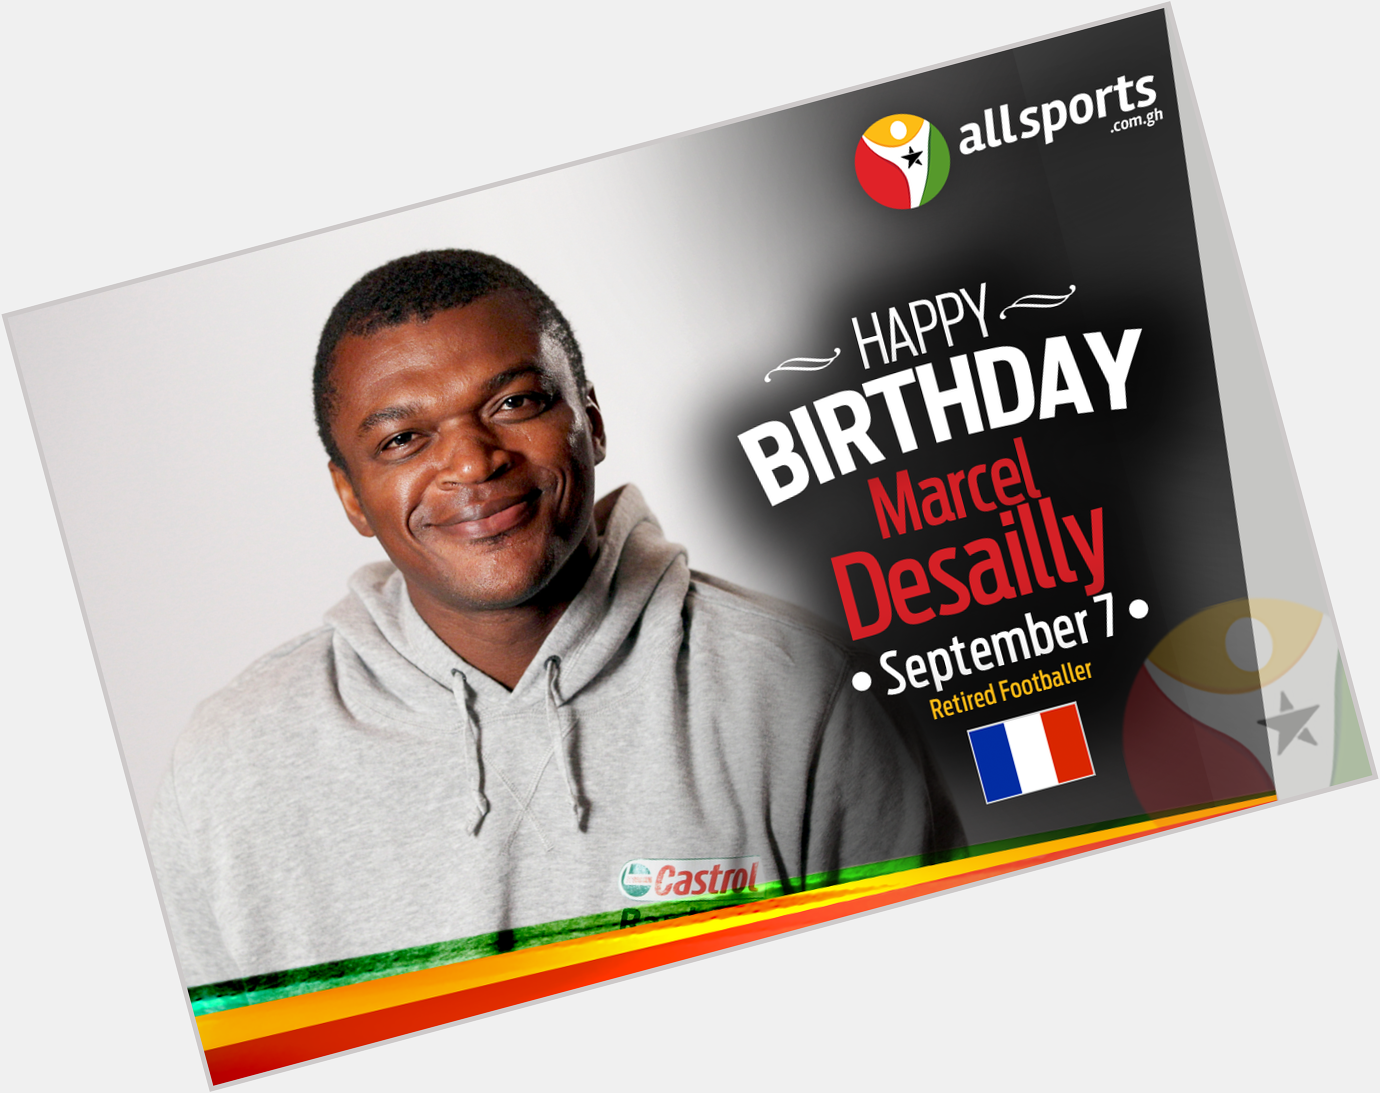 AllSportsGh wishes former France international, Marcel Desailly a HAPPY BIRTHDAY as he turns 47 today. 